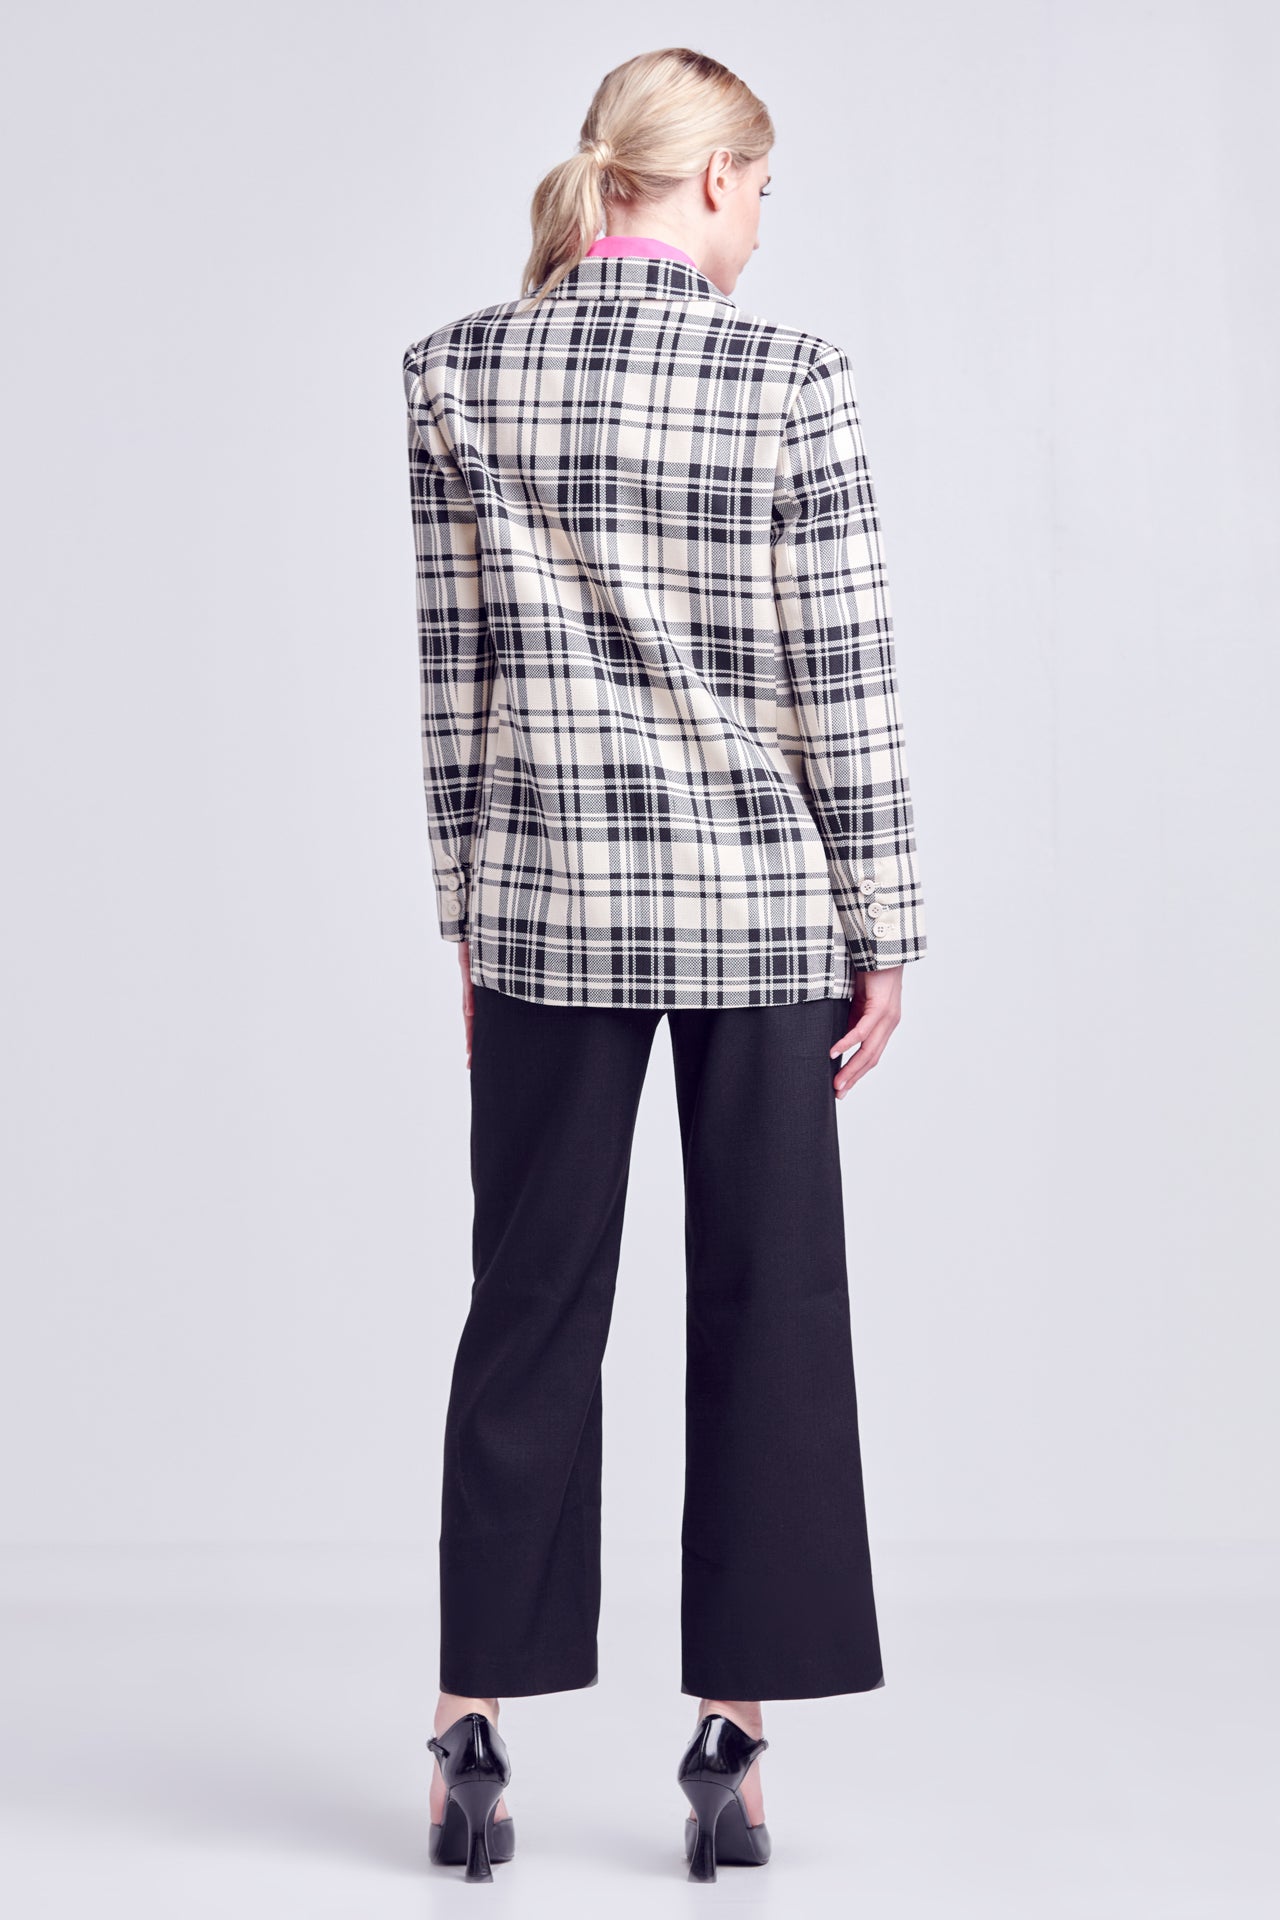 ENGLISH FACTORY - Statement Plaid Blazer - BLAZERS available at Objectrare